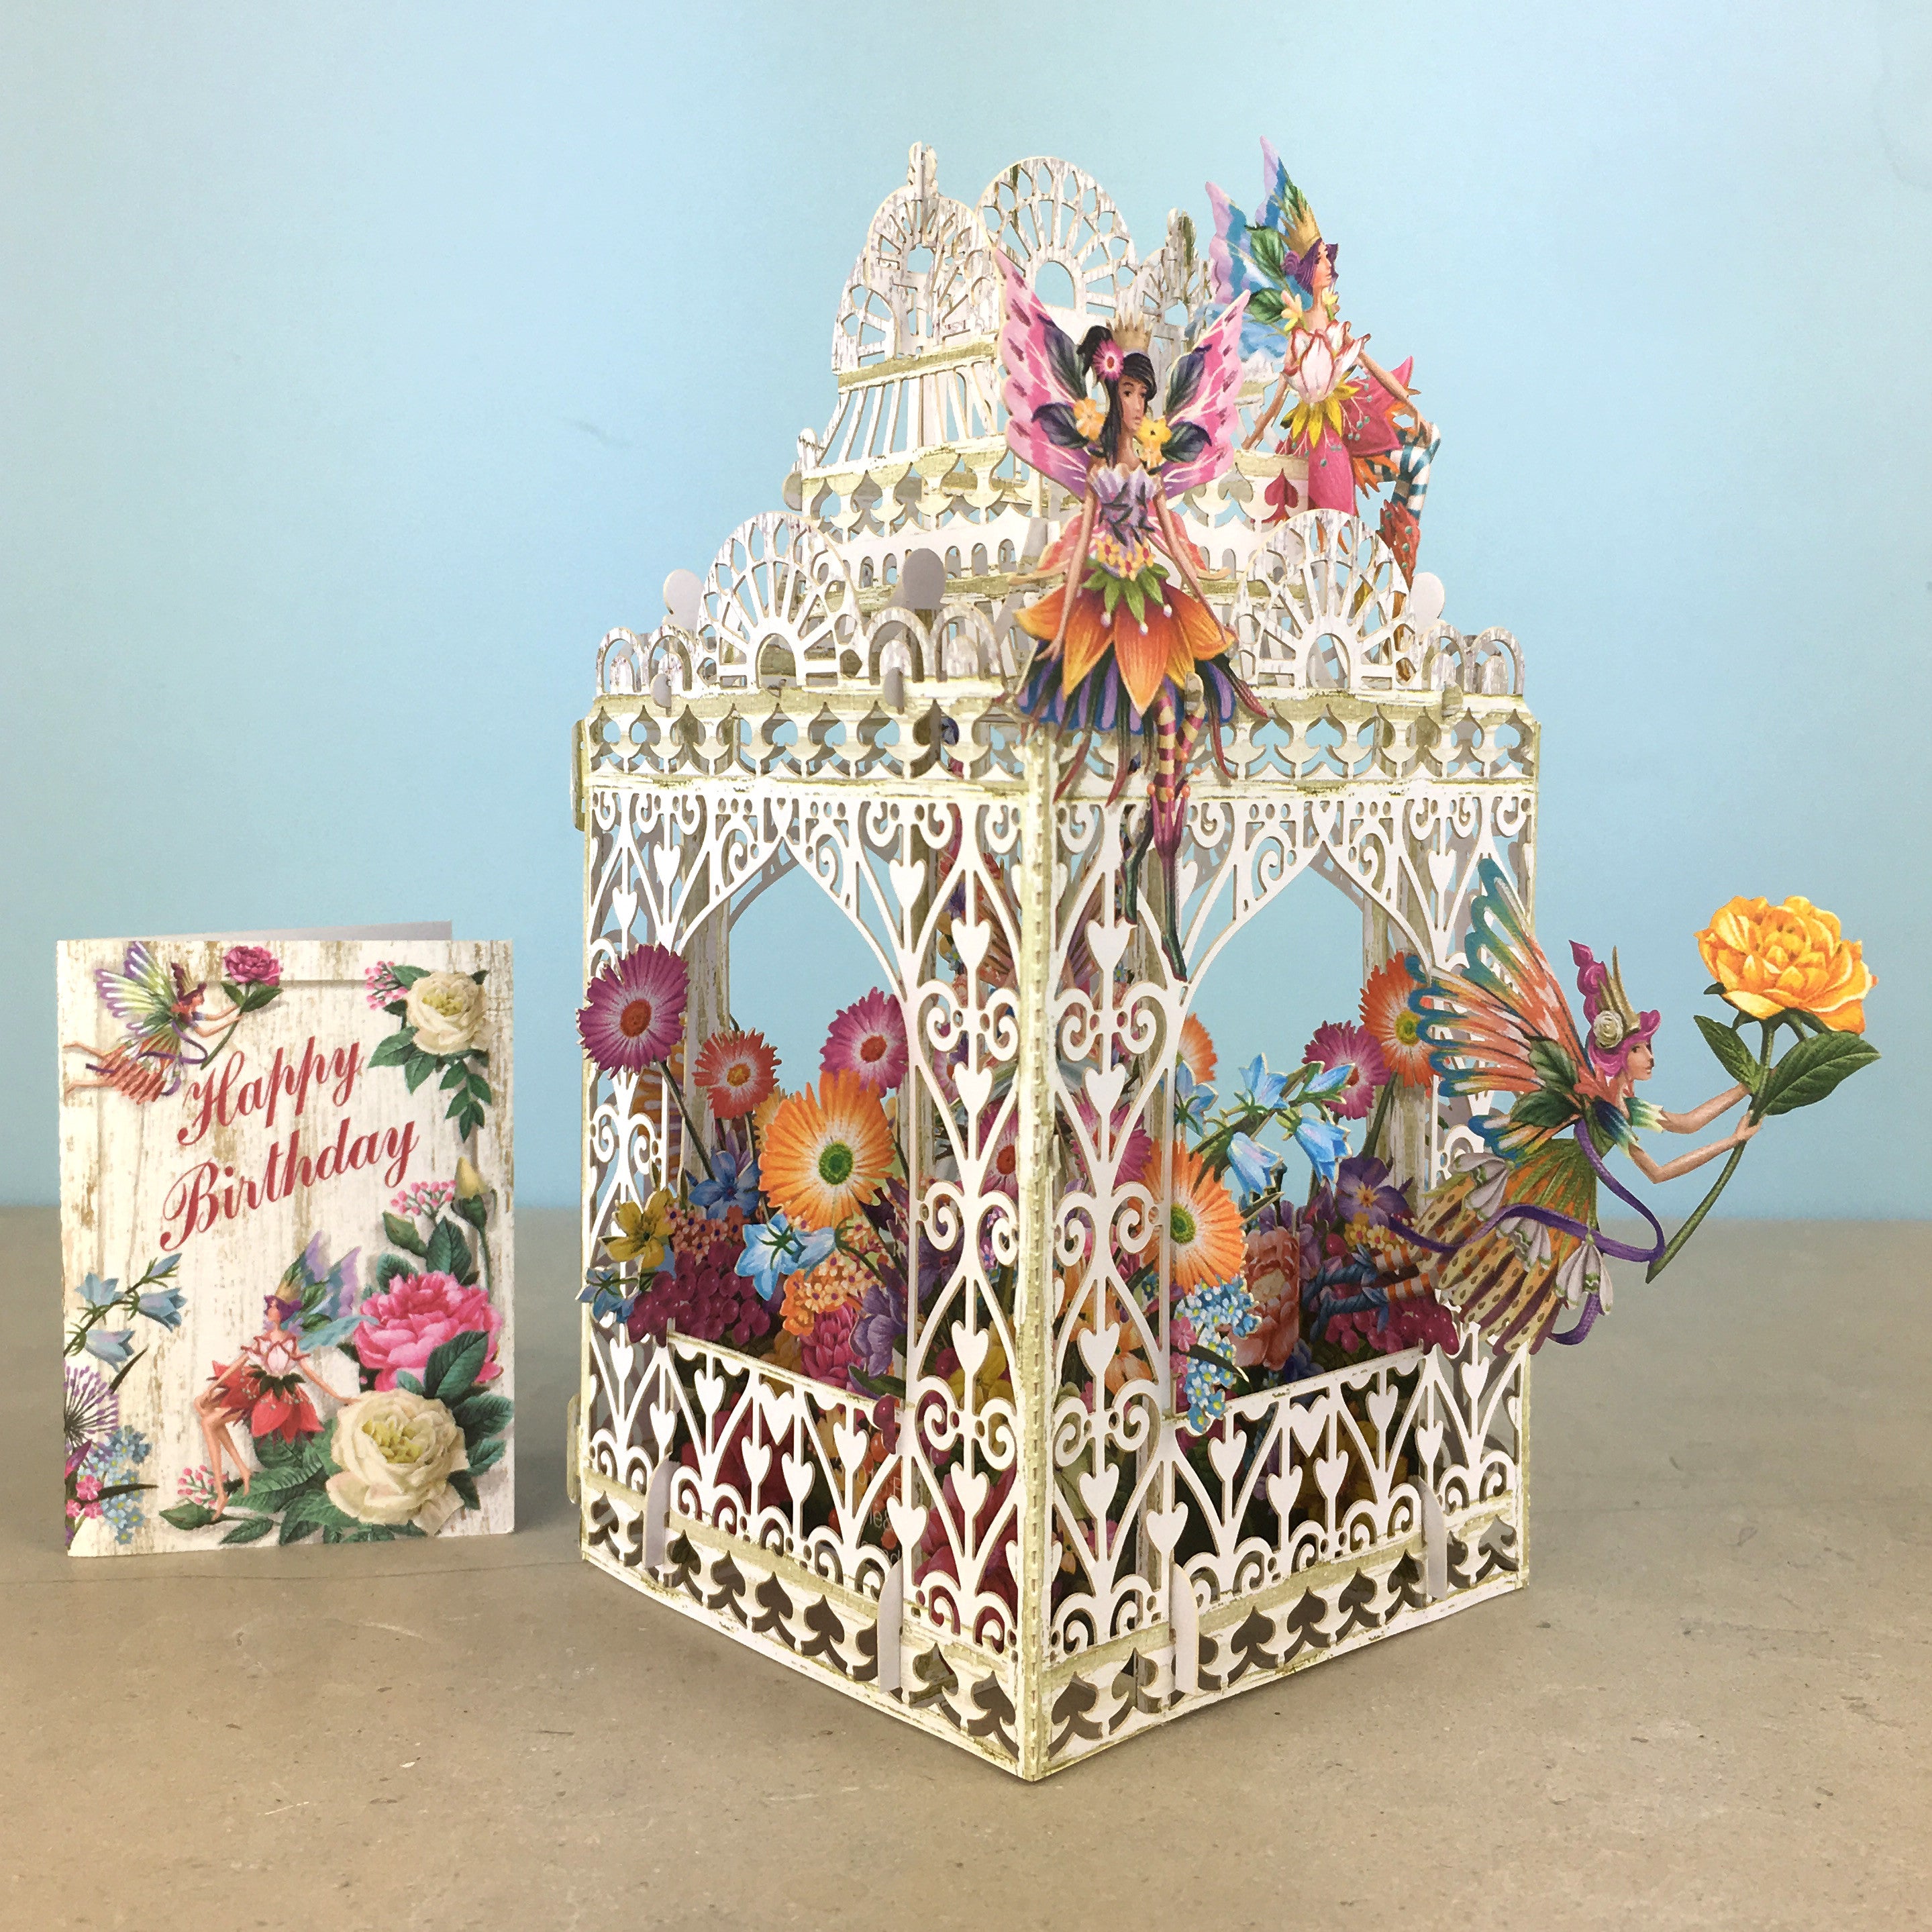 Flower Fairies play amongst flowers in laser cut paper birdcage by Me&McQ